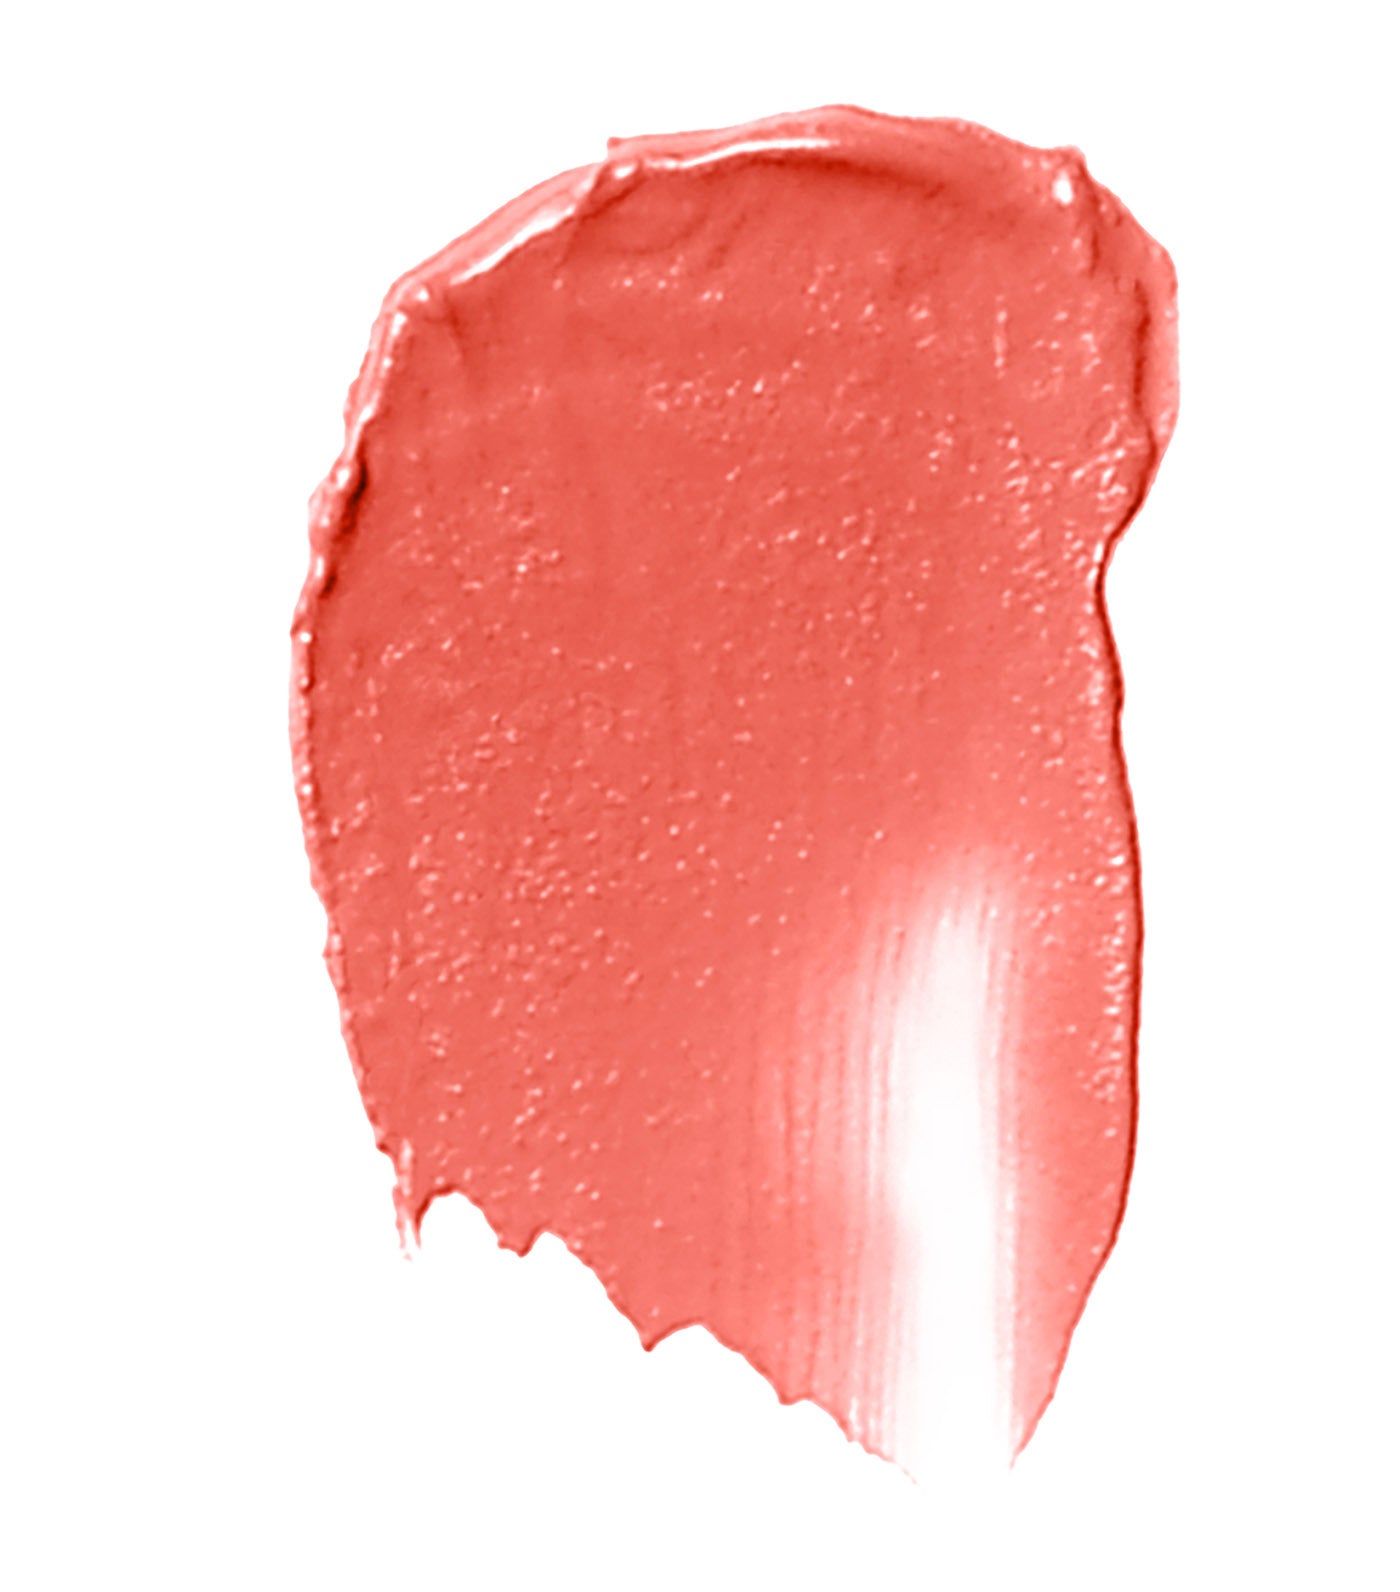 bobbi brown calypso coral pot rouge for lips and cheeks